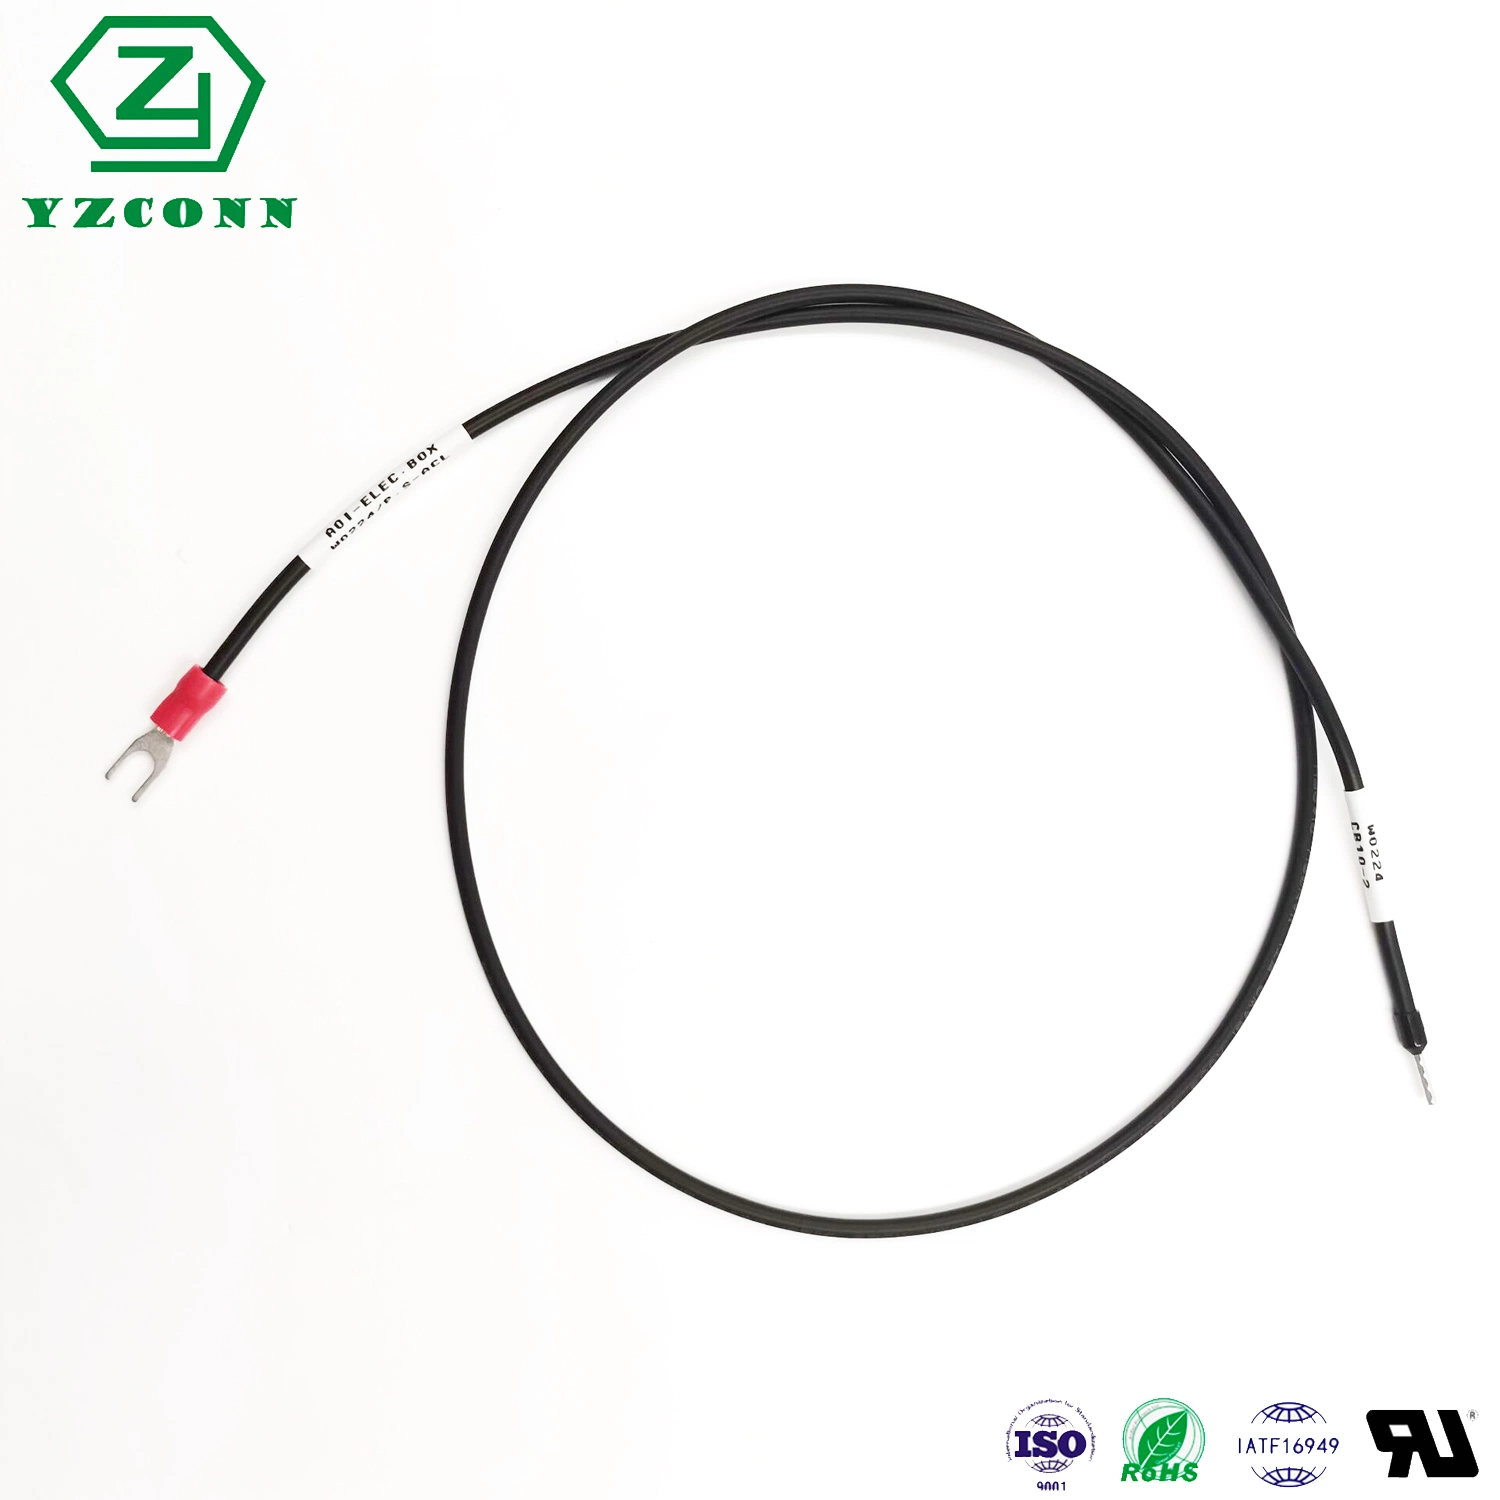 Ground Wire Earth Leads with Ring Terminal Earthing Wire Harness